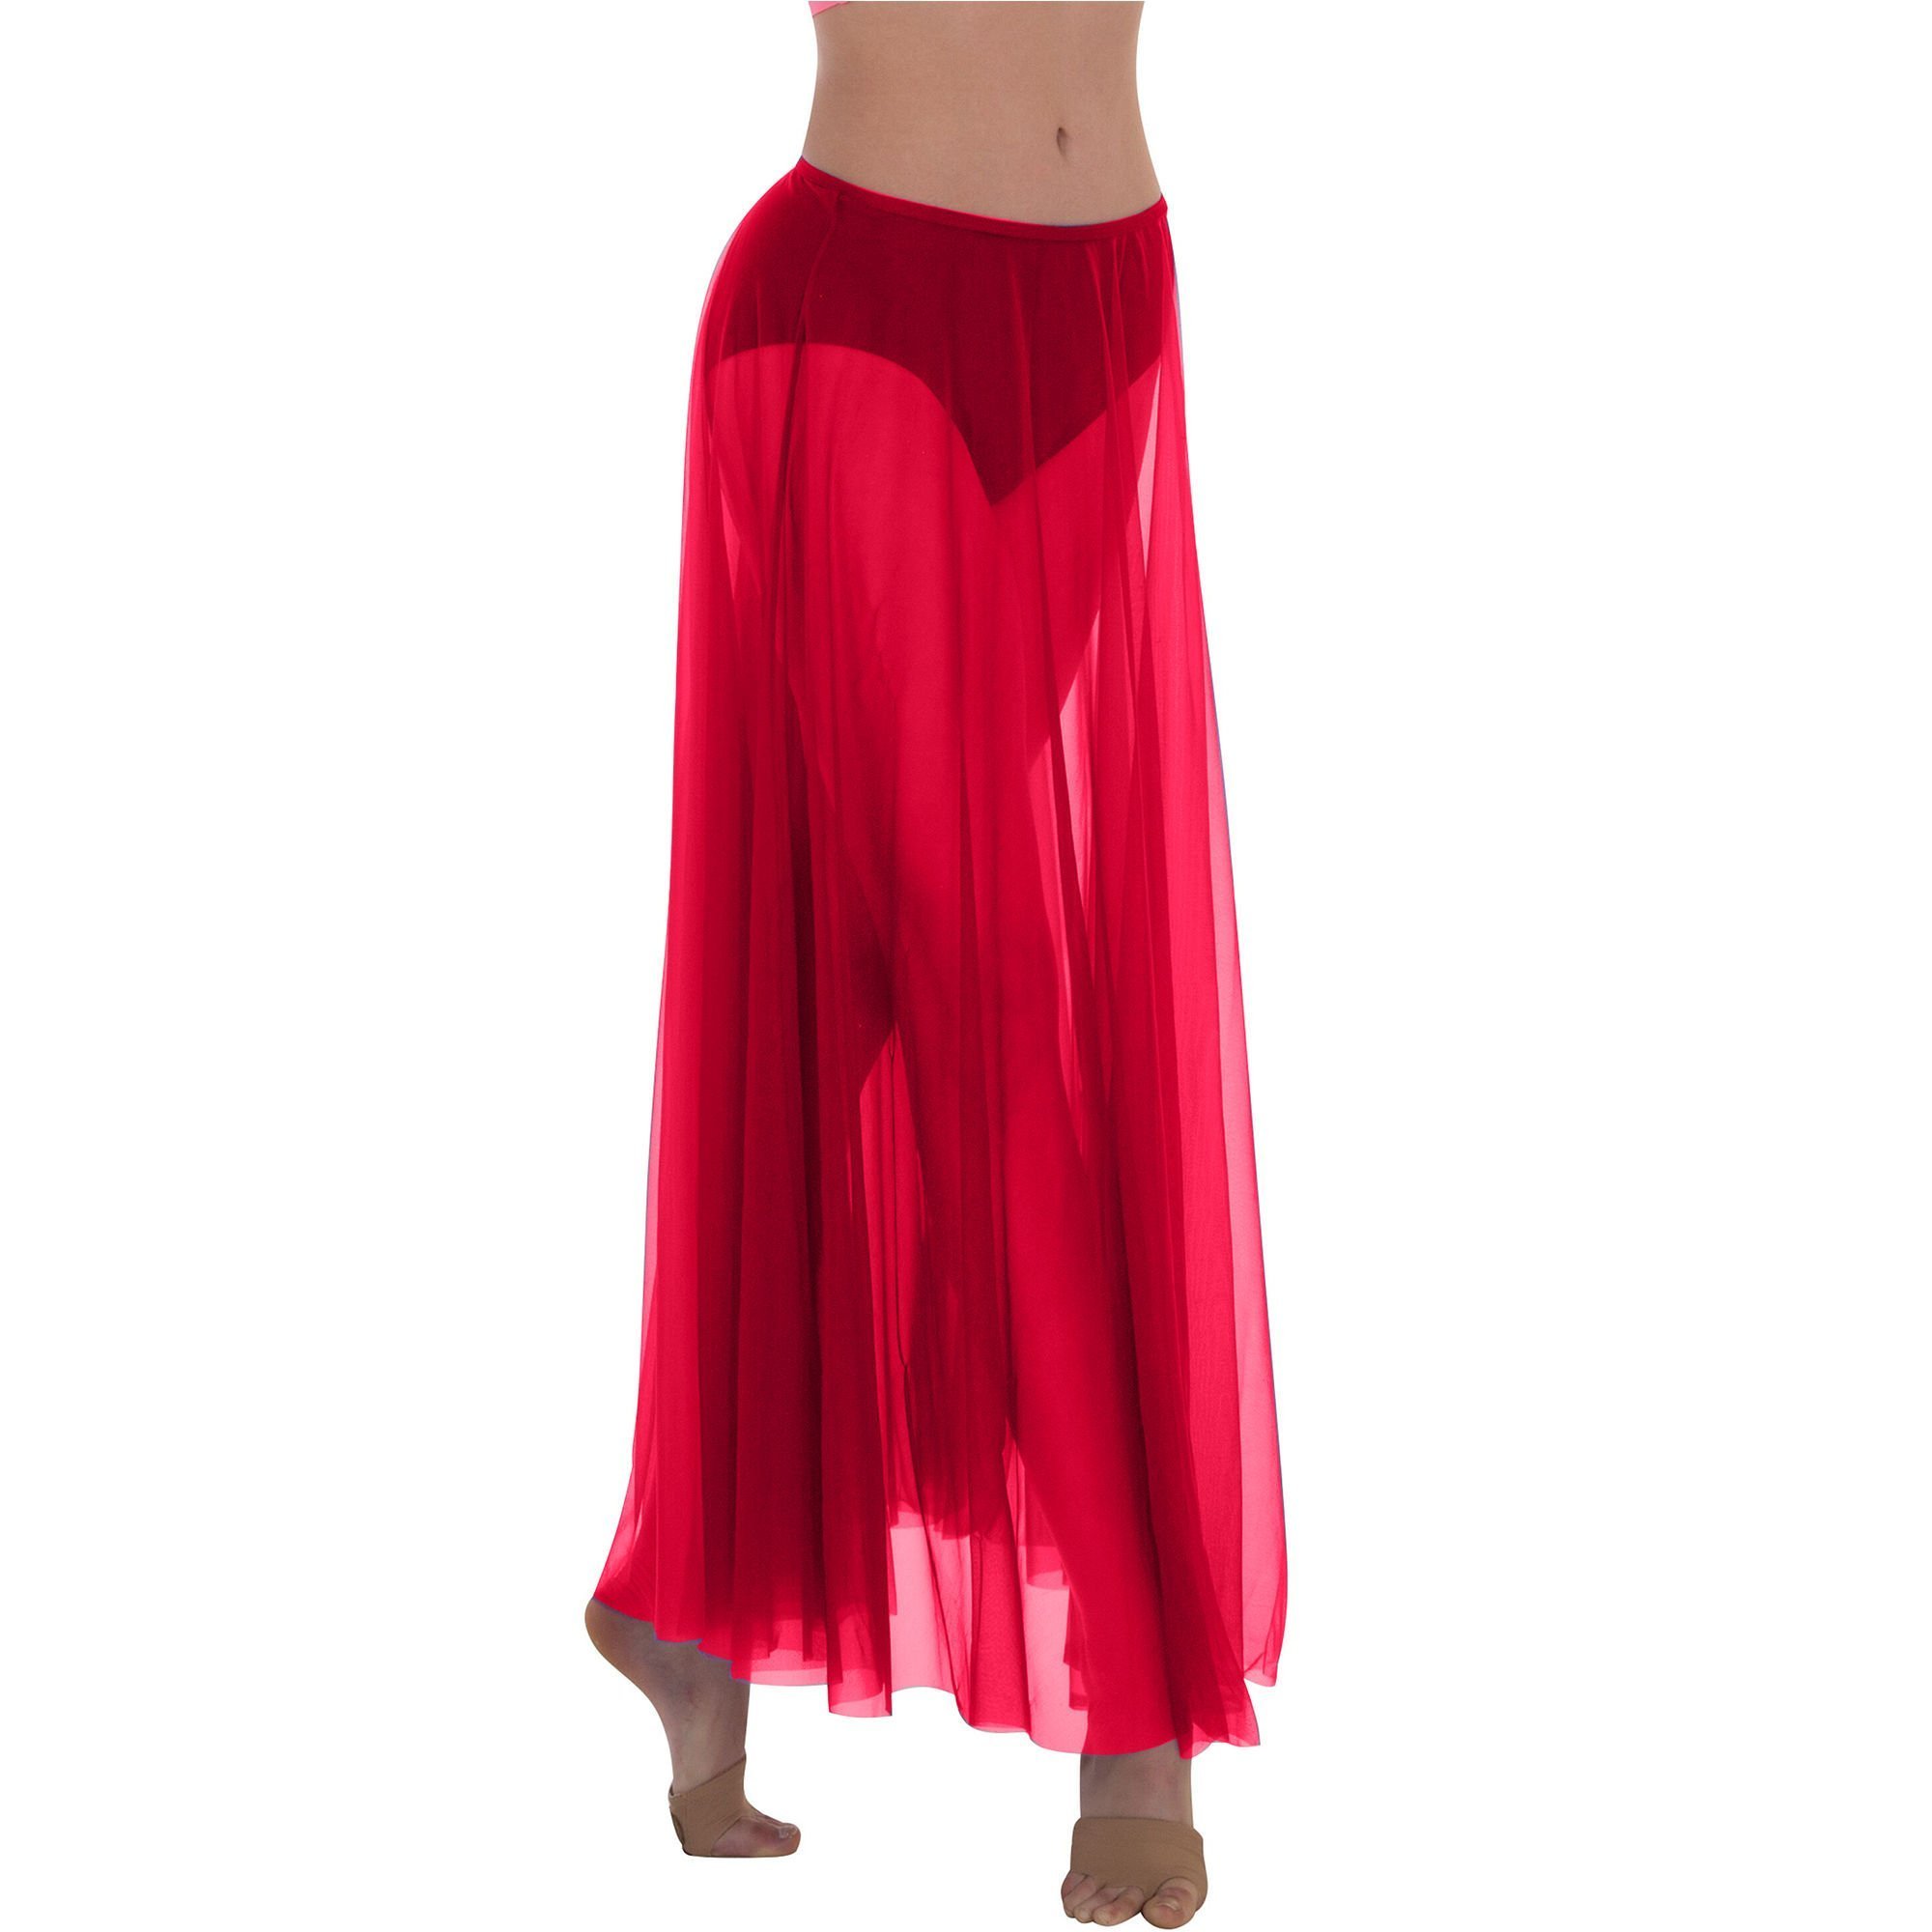 Body Wrappers Ministry Dance Long Full Chiffon Skirt [BWP538] - $25.49